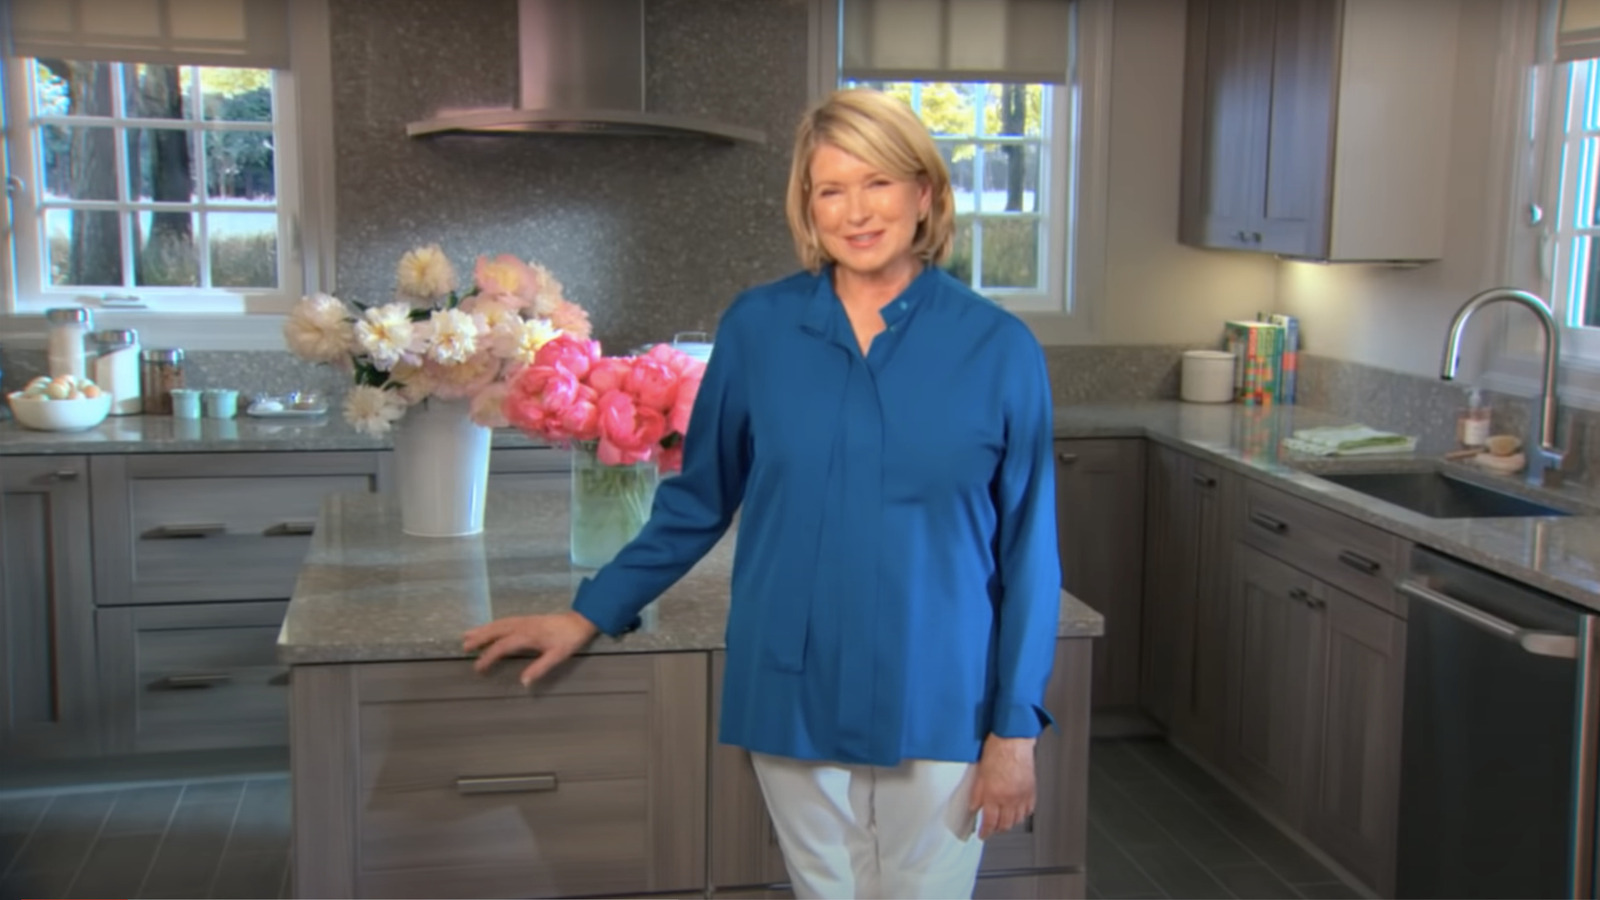 https://www.housedigest.com/img/gallery/simple-organizing-tips-from-martha-stewart-to-help-your-kitchen-run-more-smoothly/l-intro-1687177192.jpg